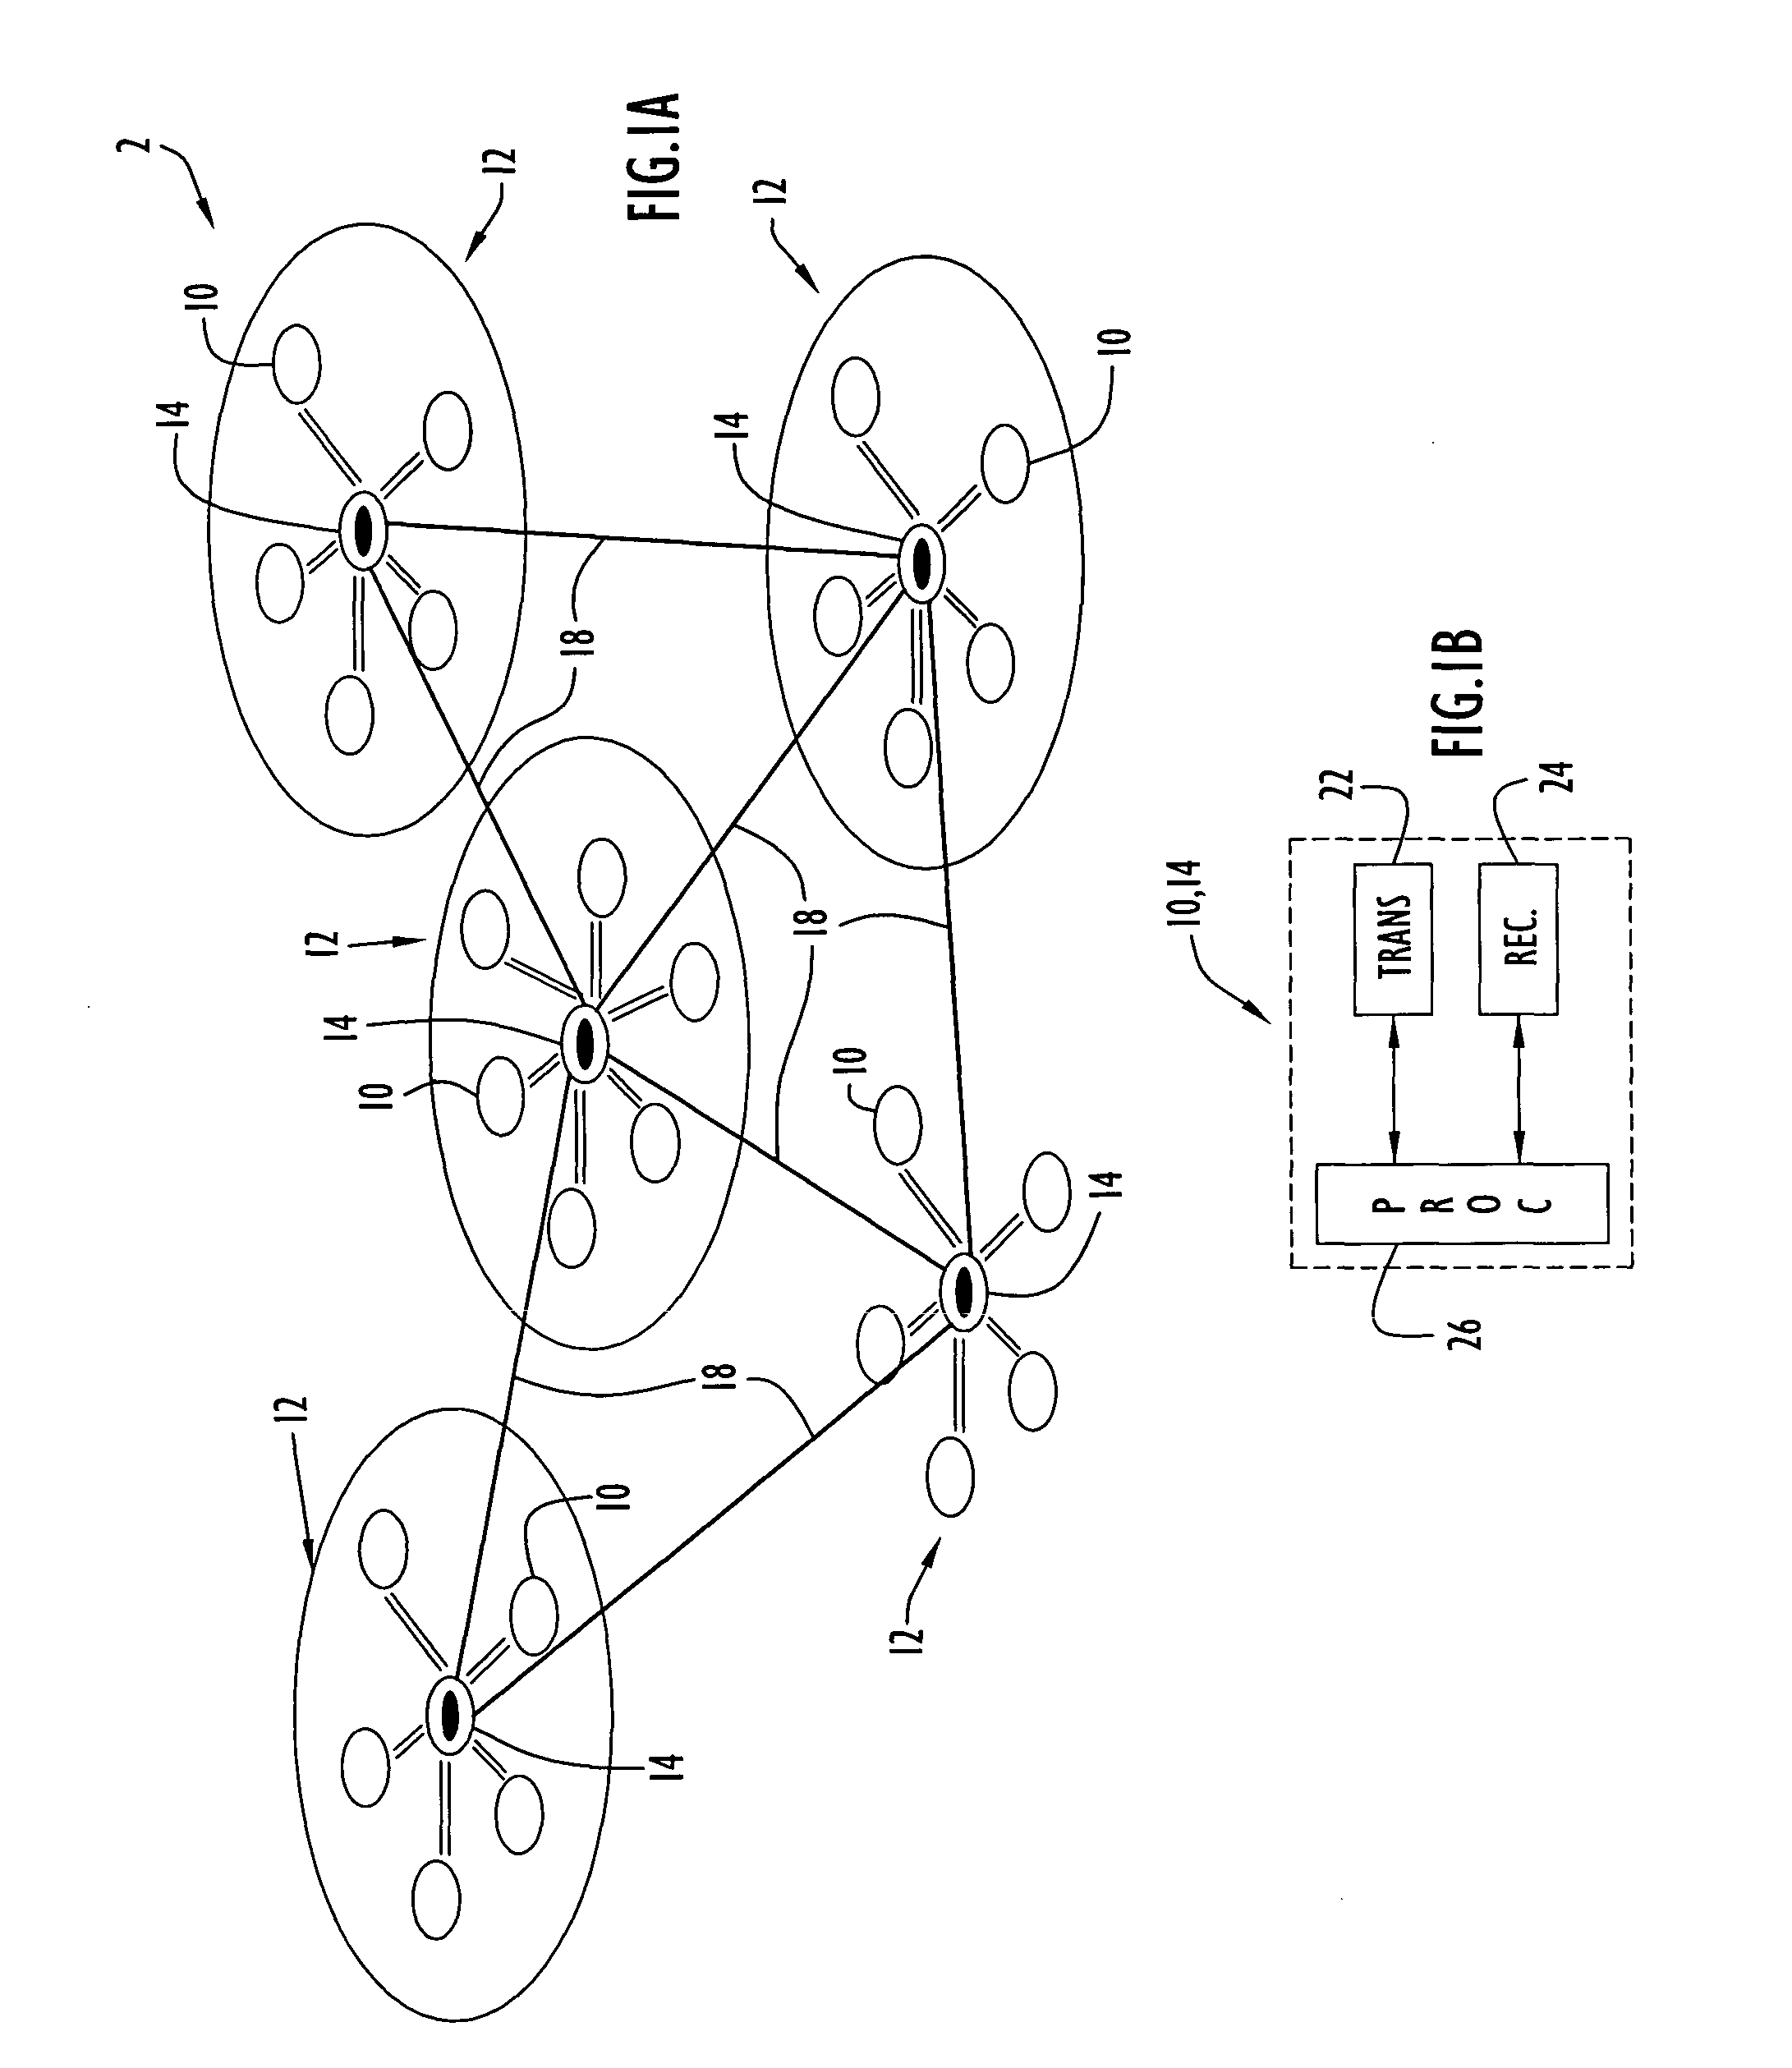 Method and apparatus for automatic control of time-of-day synchronization and merging of networks